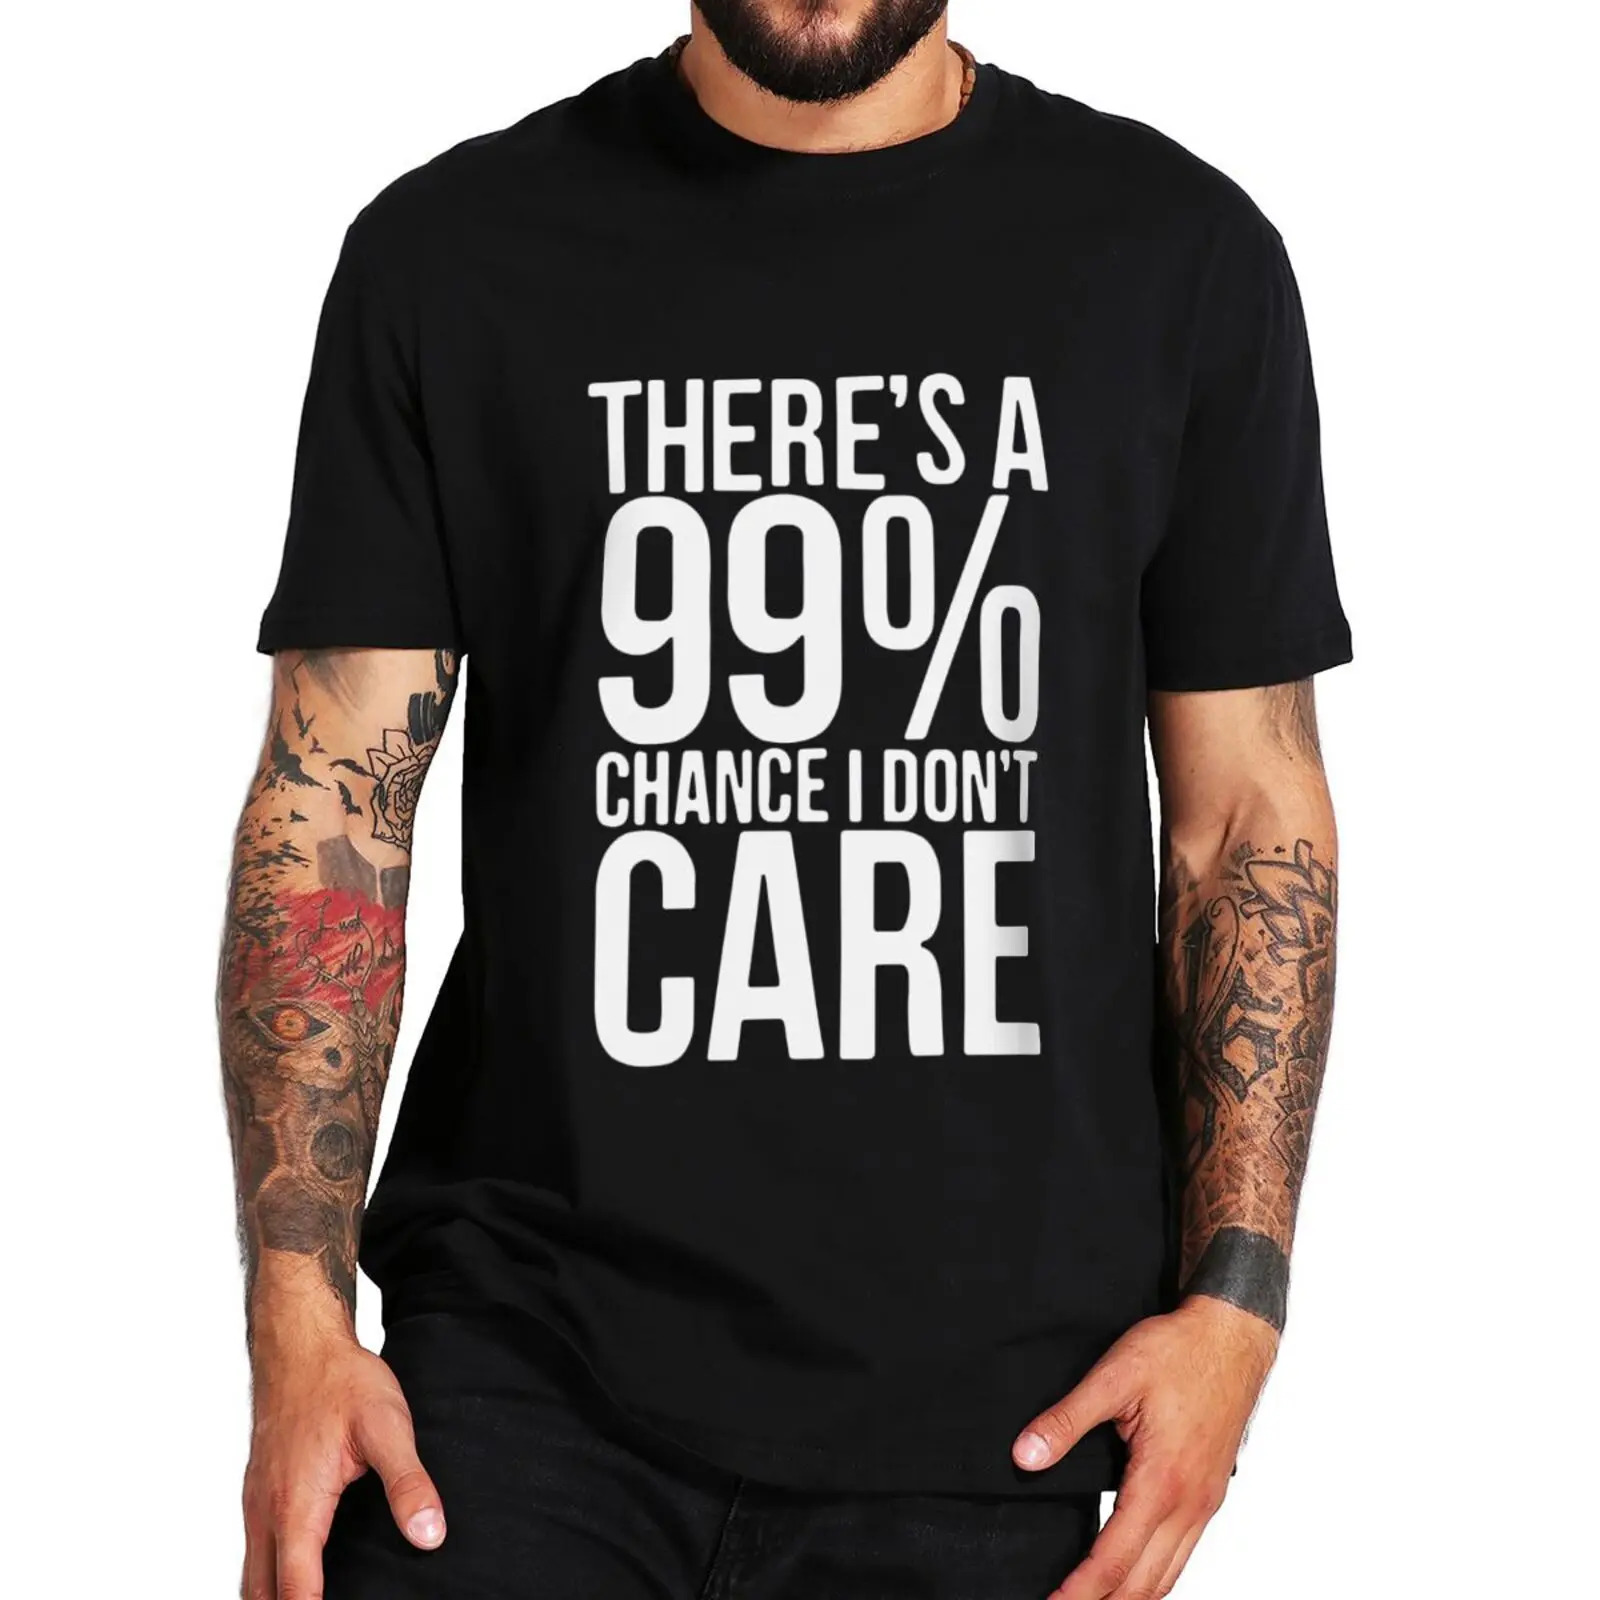 

There's A 99% Chance I Don't Care T Shirt Funny Saying Humor Slogan Men Women T-shirts Round Neck 100% Cotton Casual Tee Tops